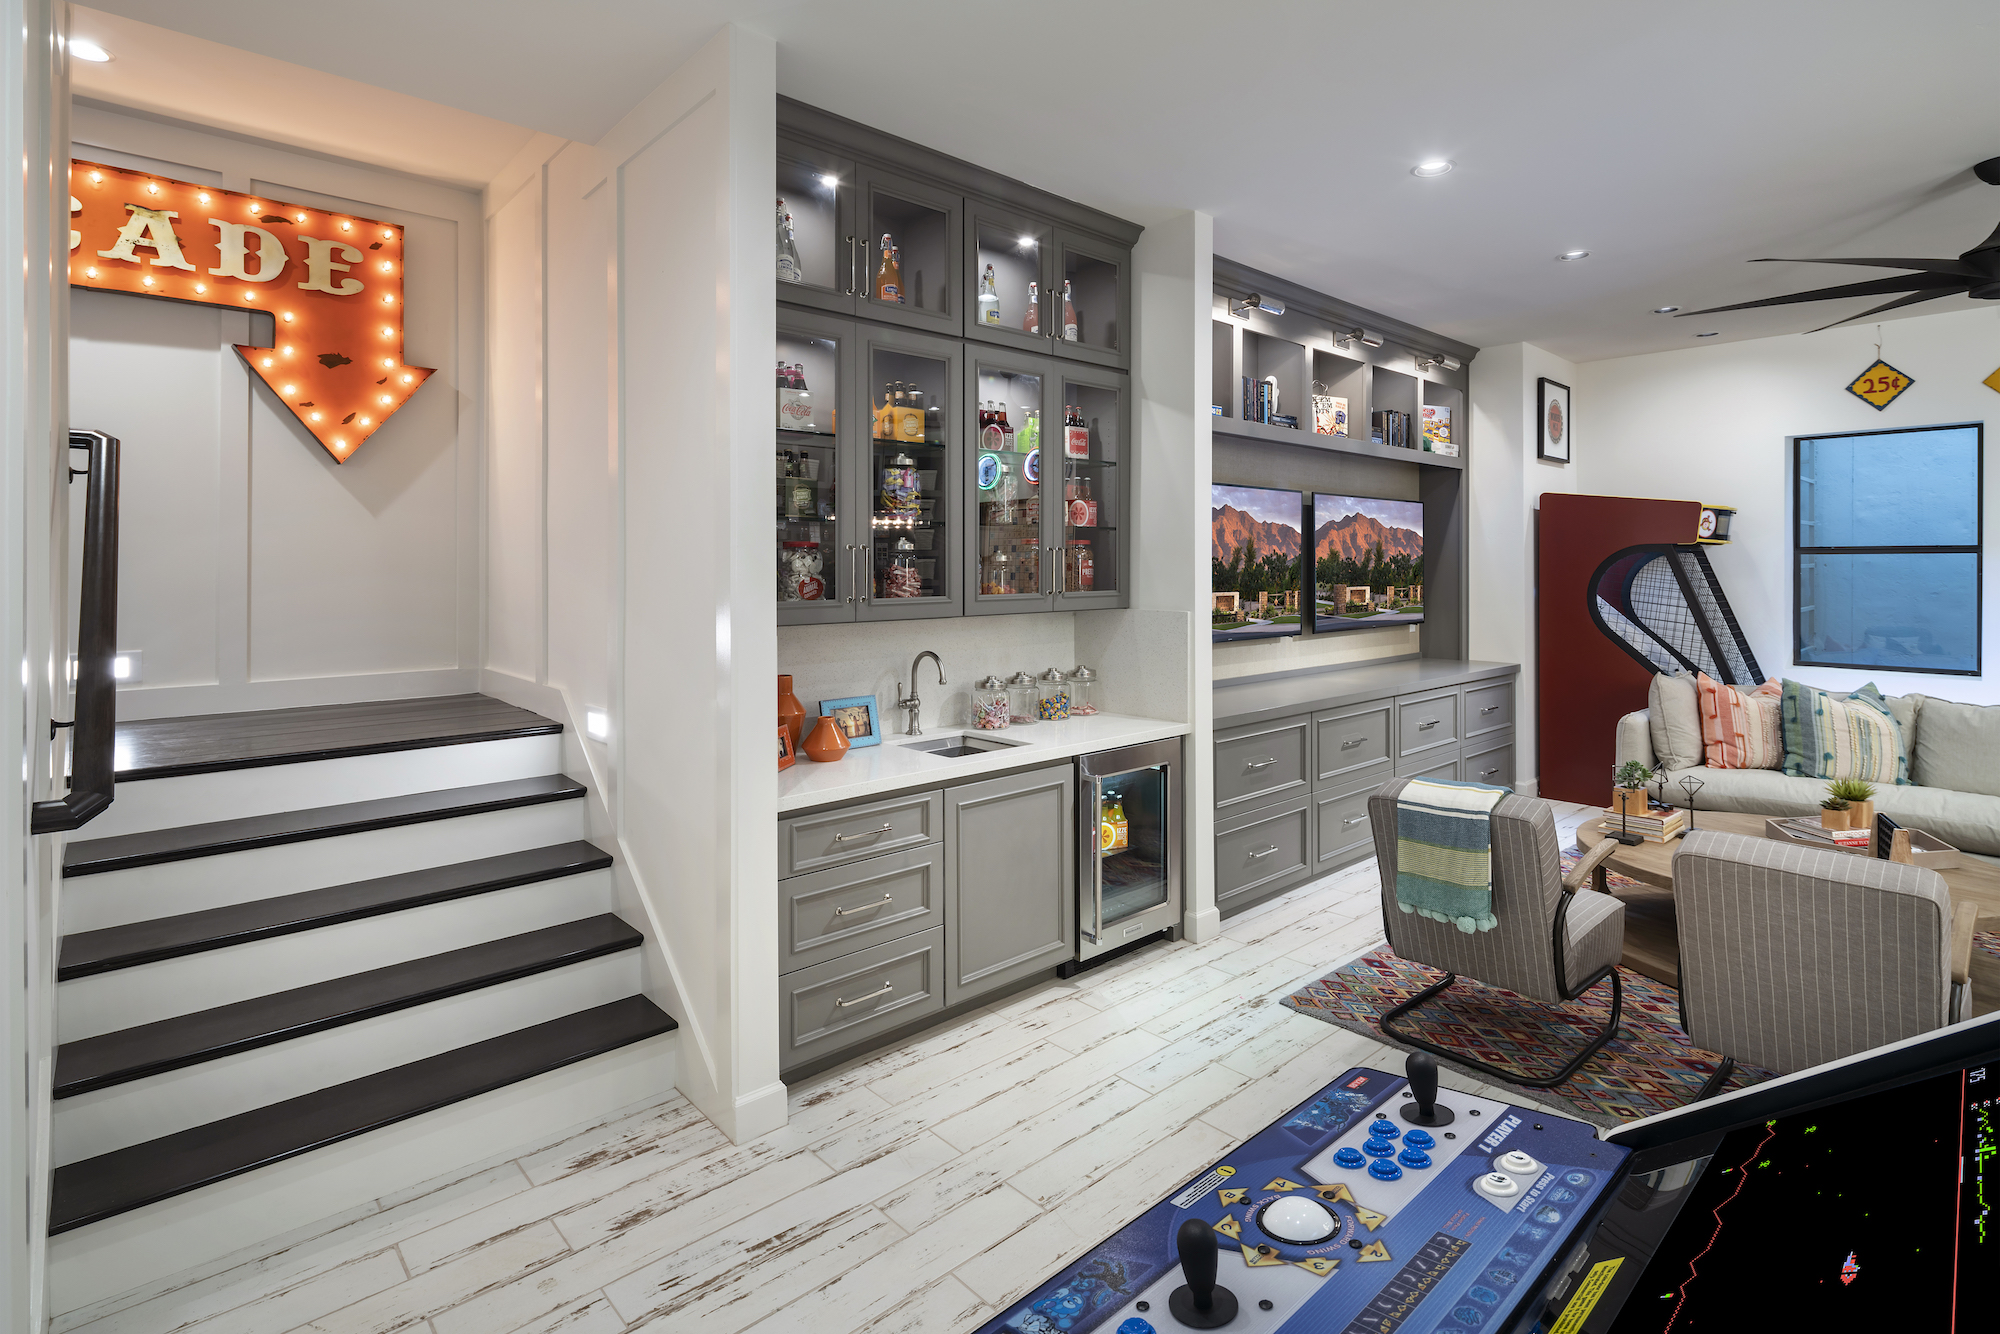 Modern Playroom in a Finished Basement